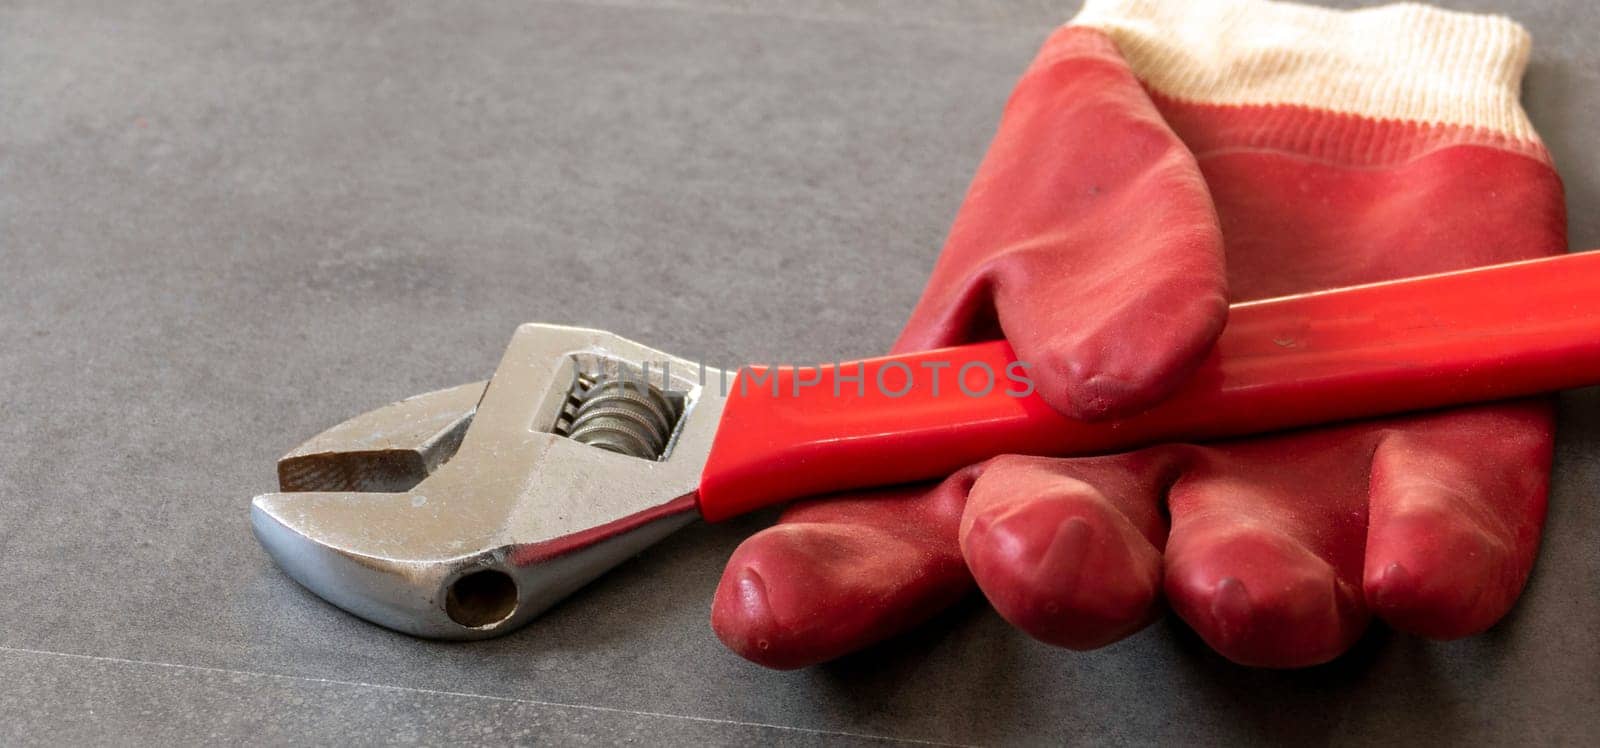 For work safety, it is necessary to work with gloves, a wrench, thick plastic gloves are standing on a floor,